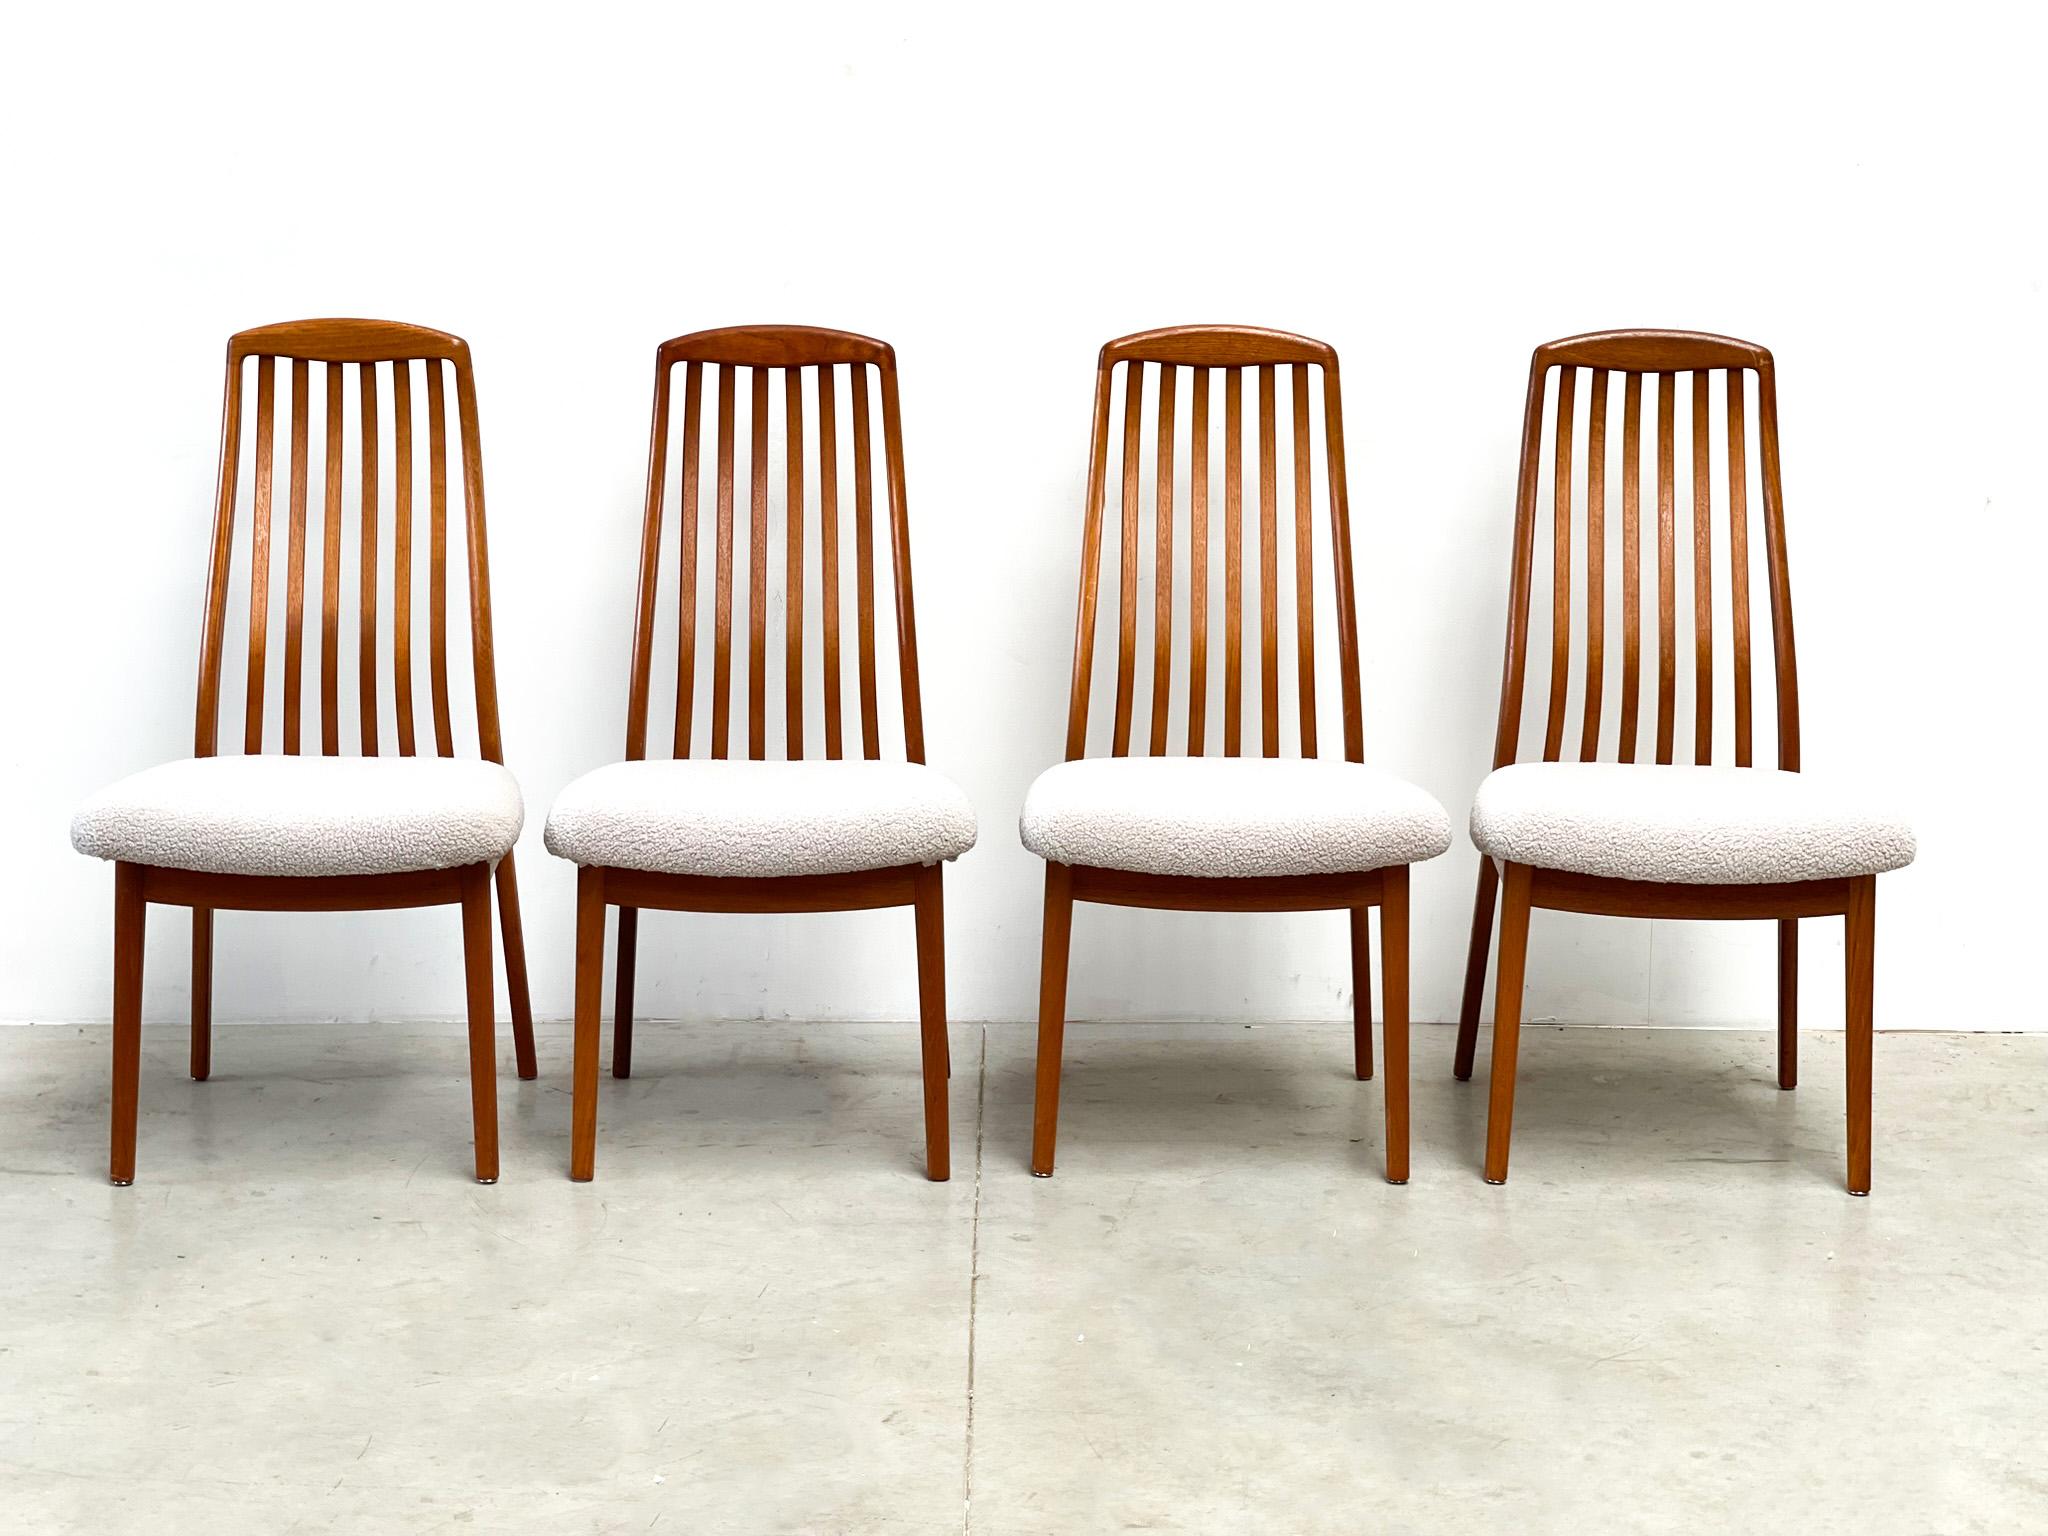 4 dining chairs by Preben Shou Denmark
Very nice and high quality dining chairs. These chairs were designed by Preben Shou in the late 70's. iThis is a perfect example of fine craftsmanship and quality. The chairs have been reupholstred with a